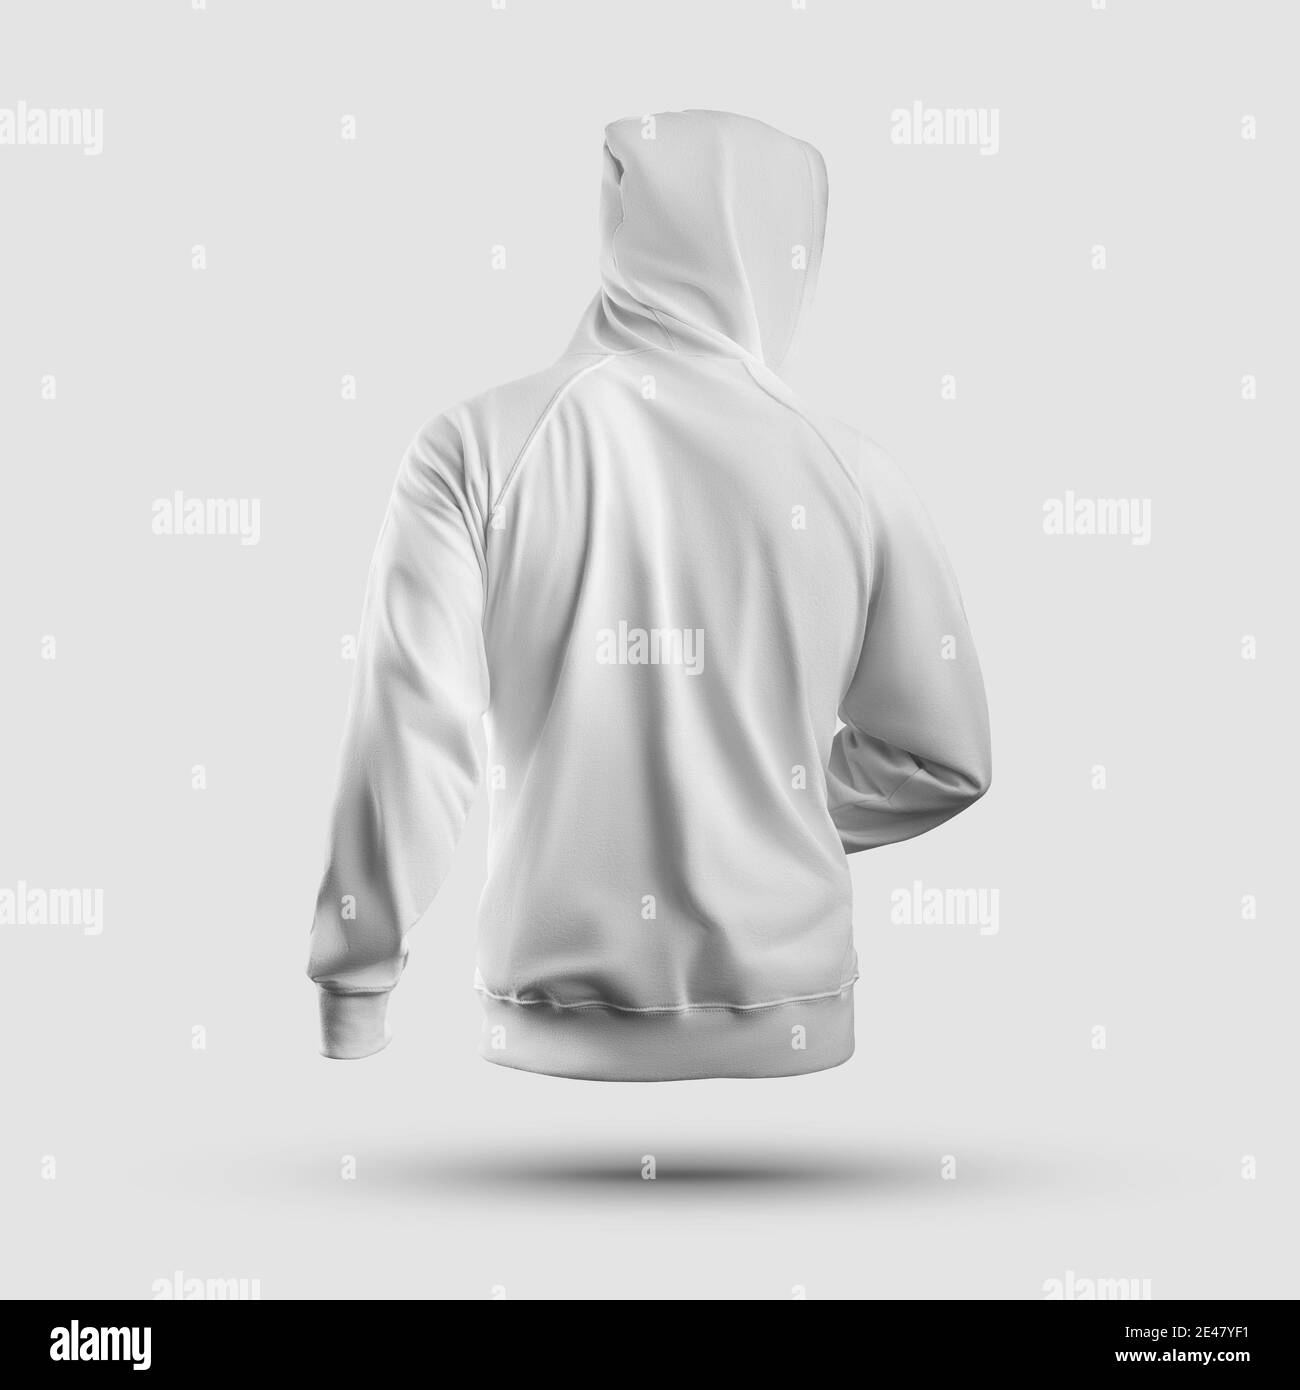 Download Mockup White Male Hoodie 3d Rendering With Hood Cuffs Isolated On Background Back View Textured Clothing Template For Presentation Of Design Prin Stock Photo Alamy